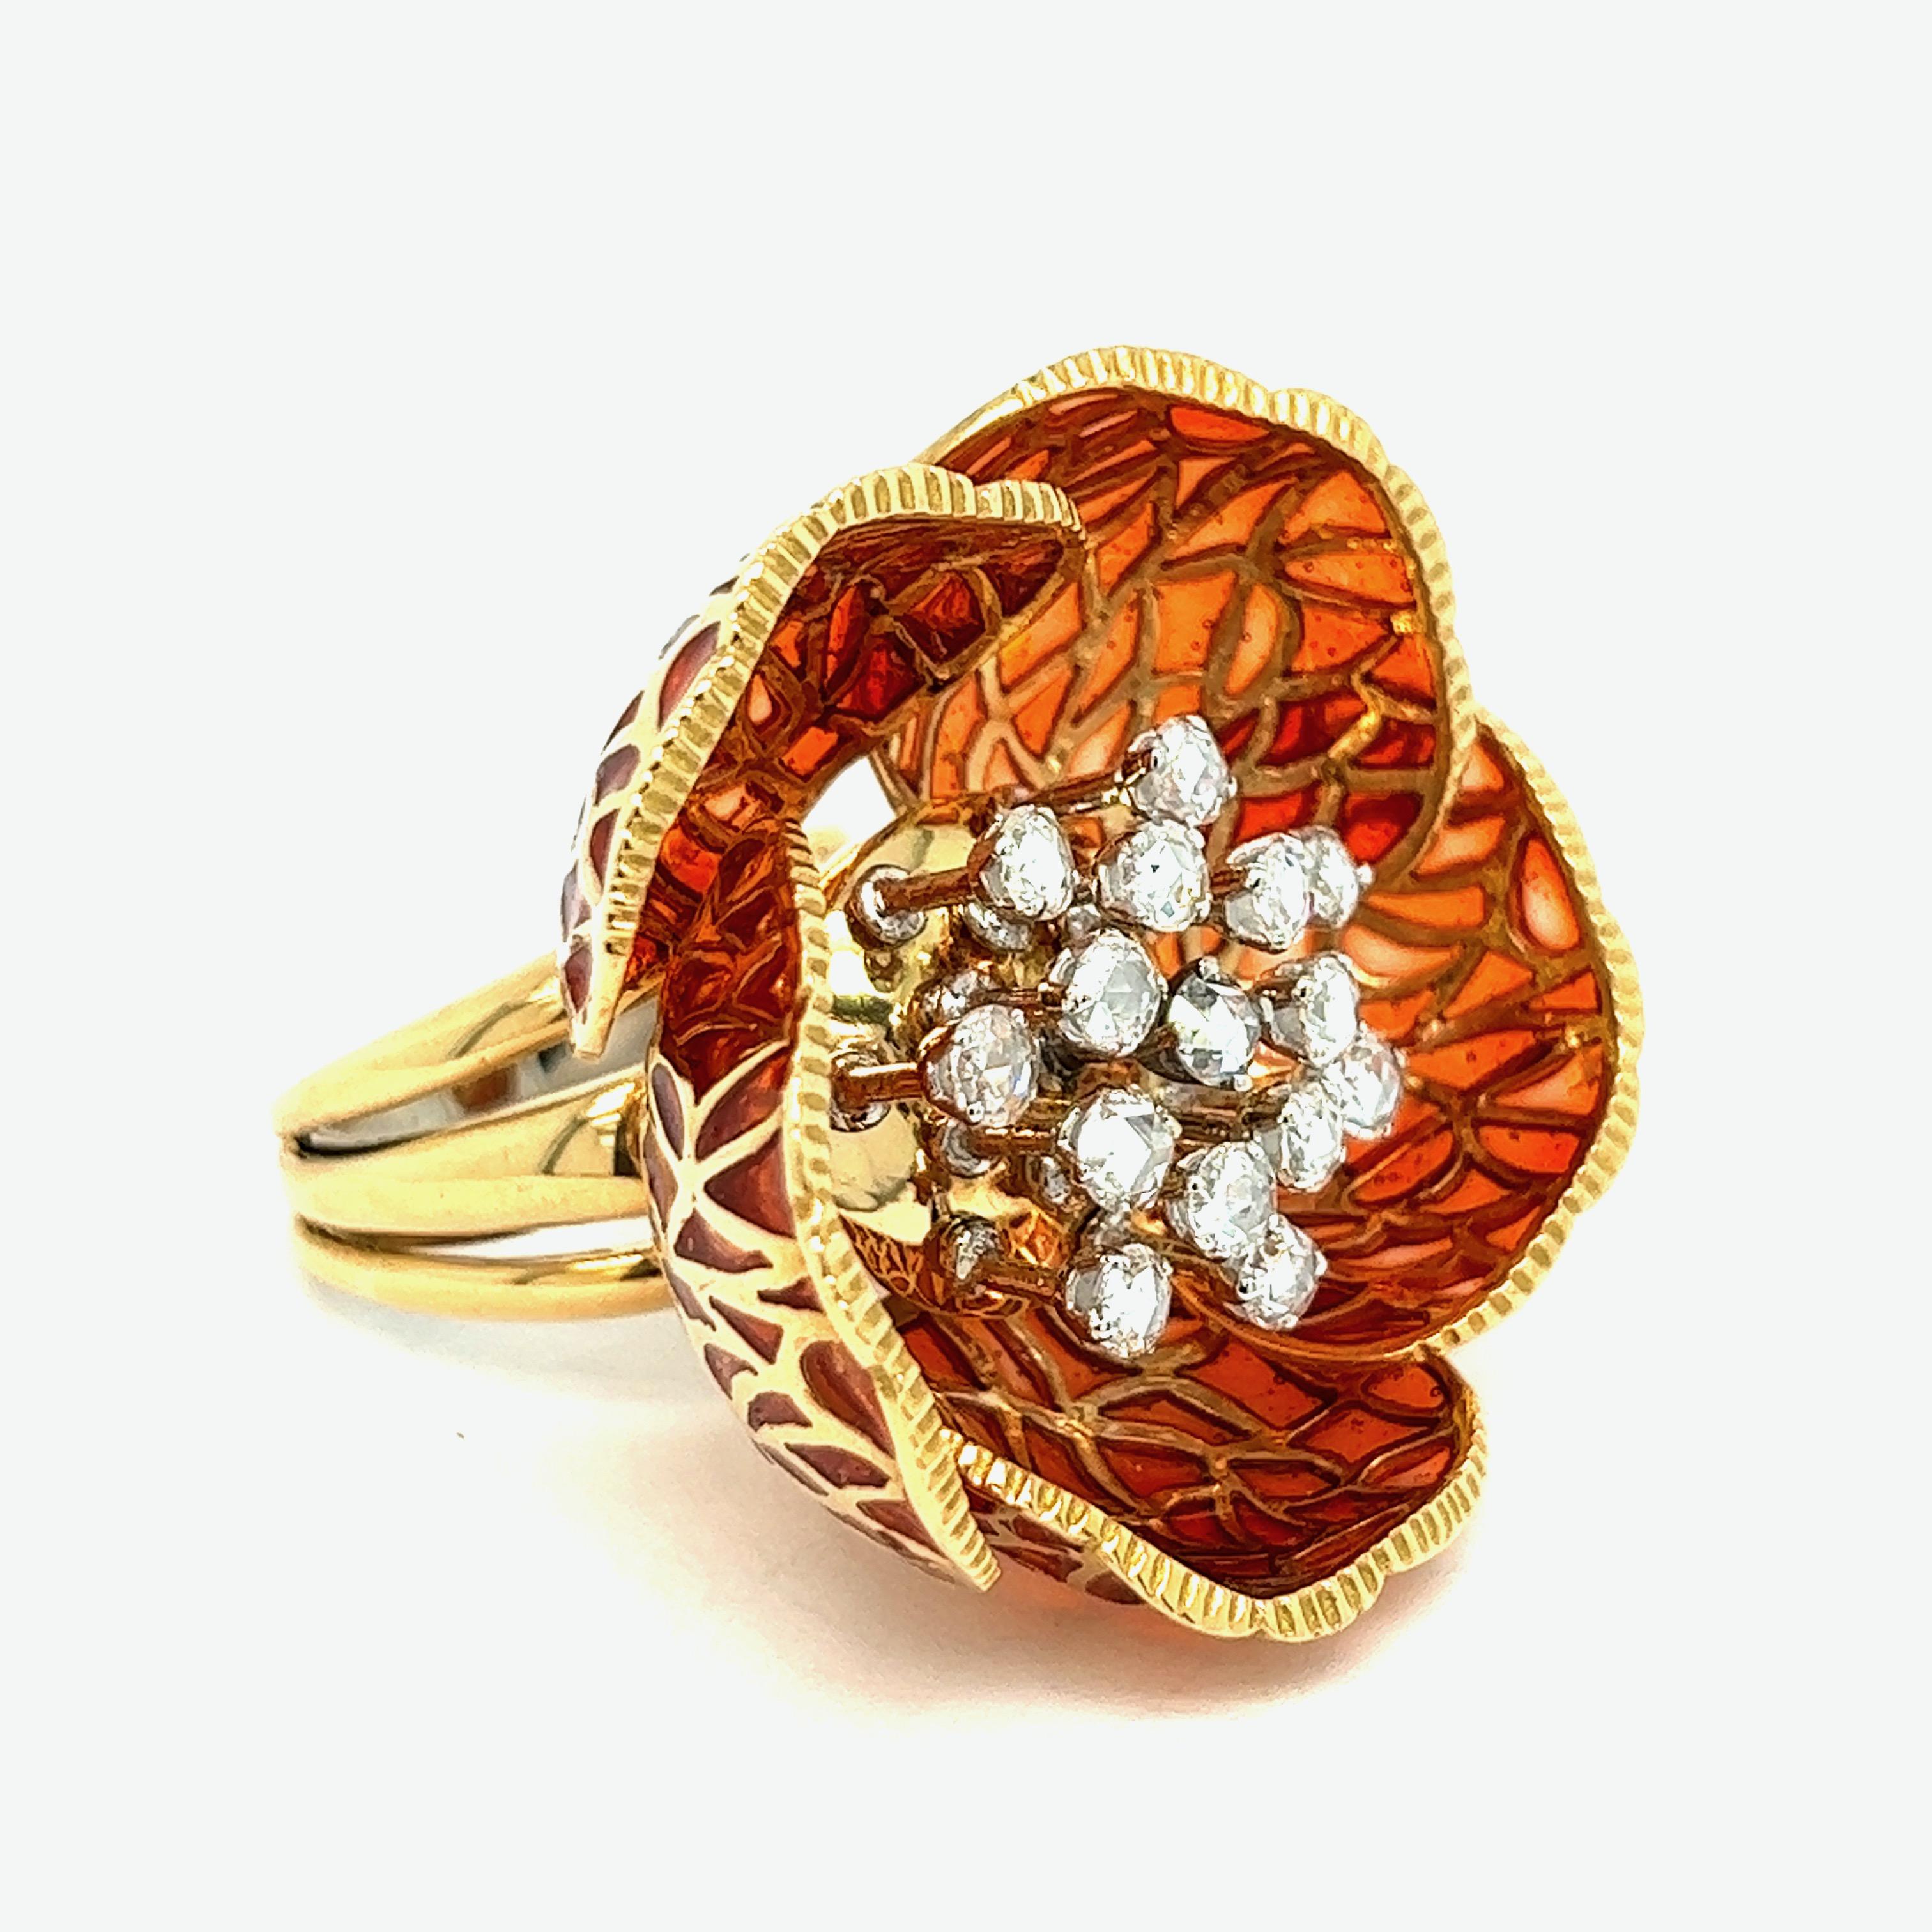 Large plique-á-jour diamond rose ring

Beautiful and well-crafted rose ring made out of 15 rose-cut diamonds of approximately 1.5 carats, orange plique-á-jour petals; 18 karat yellow gold

Size: 7.5 US; top width 1.5 inches, top length 1.5